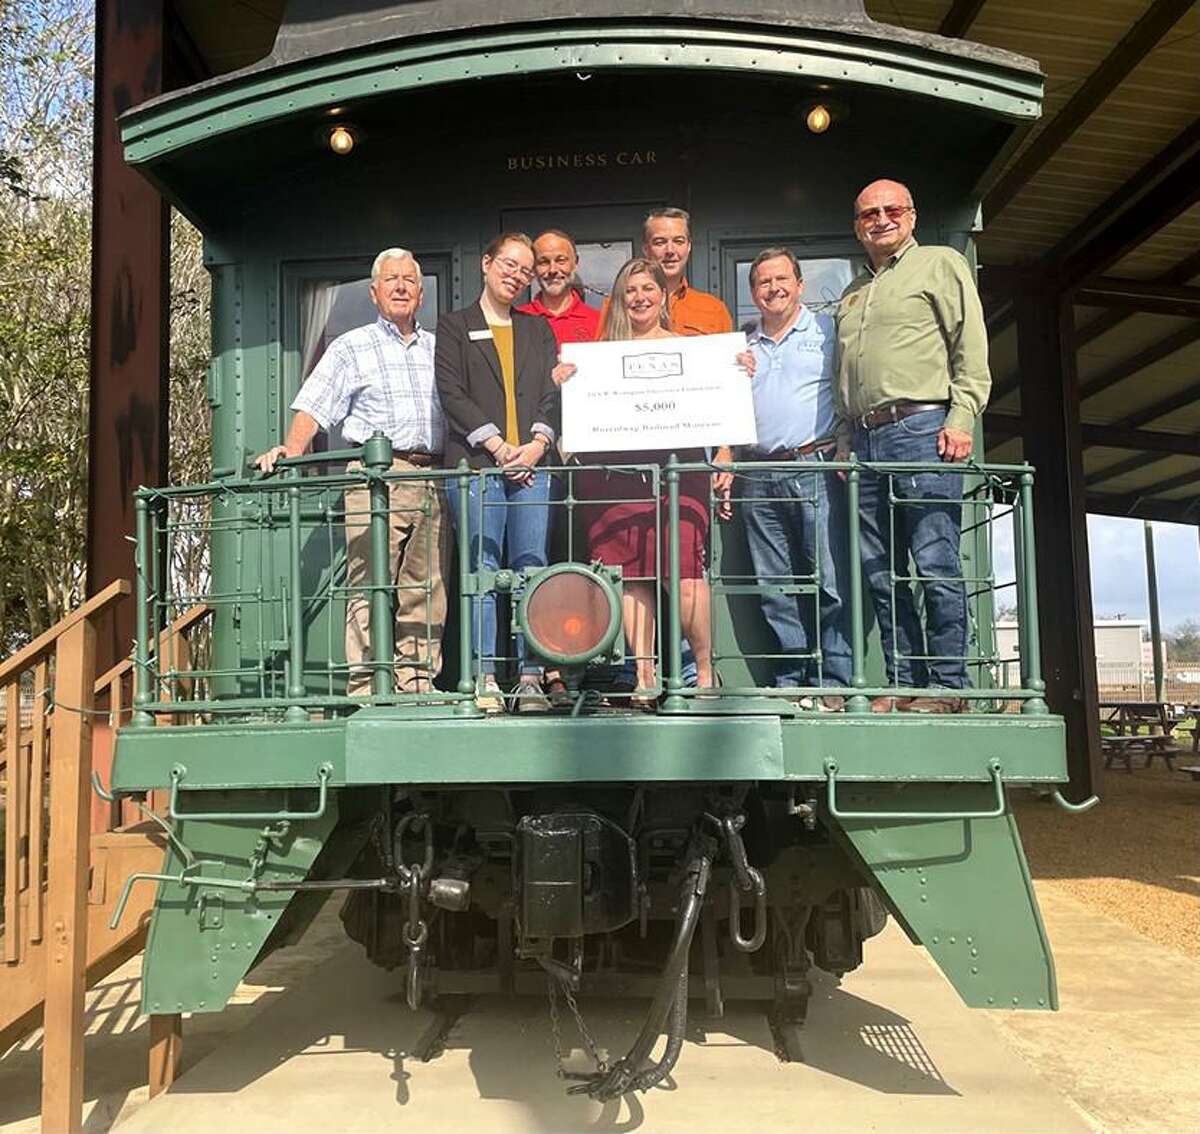 On Wednesday, Dec. 7, 2022, Texas Historical Foundation Director Patrick Biggins visited the Rosenberg Railroad Museum to present the Foundation’s October 2022 grant. Pictured from left are Joe Gurecky, Haley Wheeler, Jesse Otto, Rainey Webster, John Moore, Patrick Biggins and Bill Rickert.